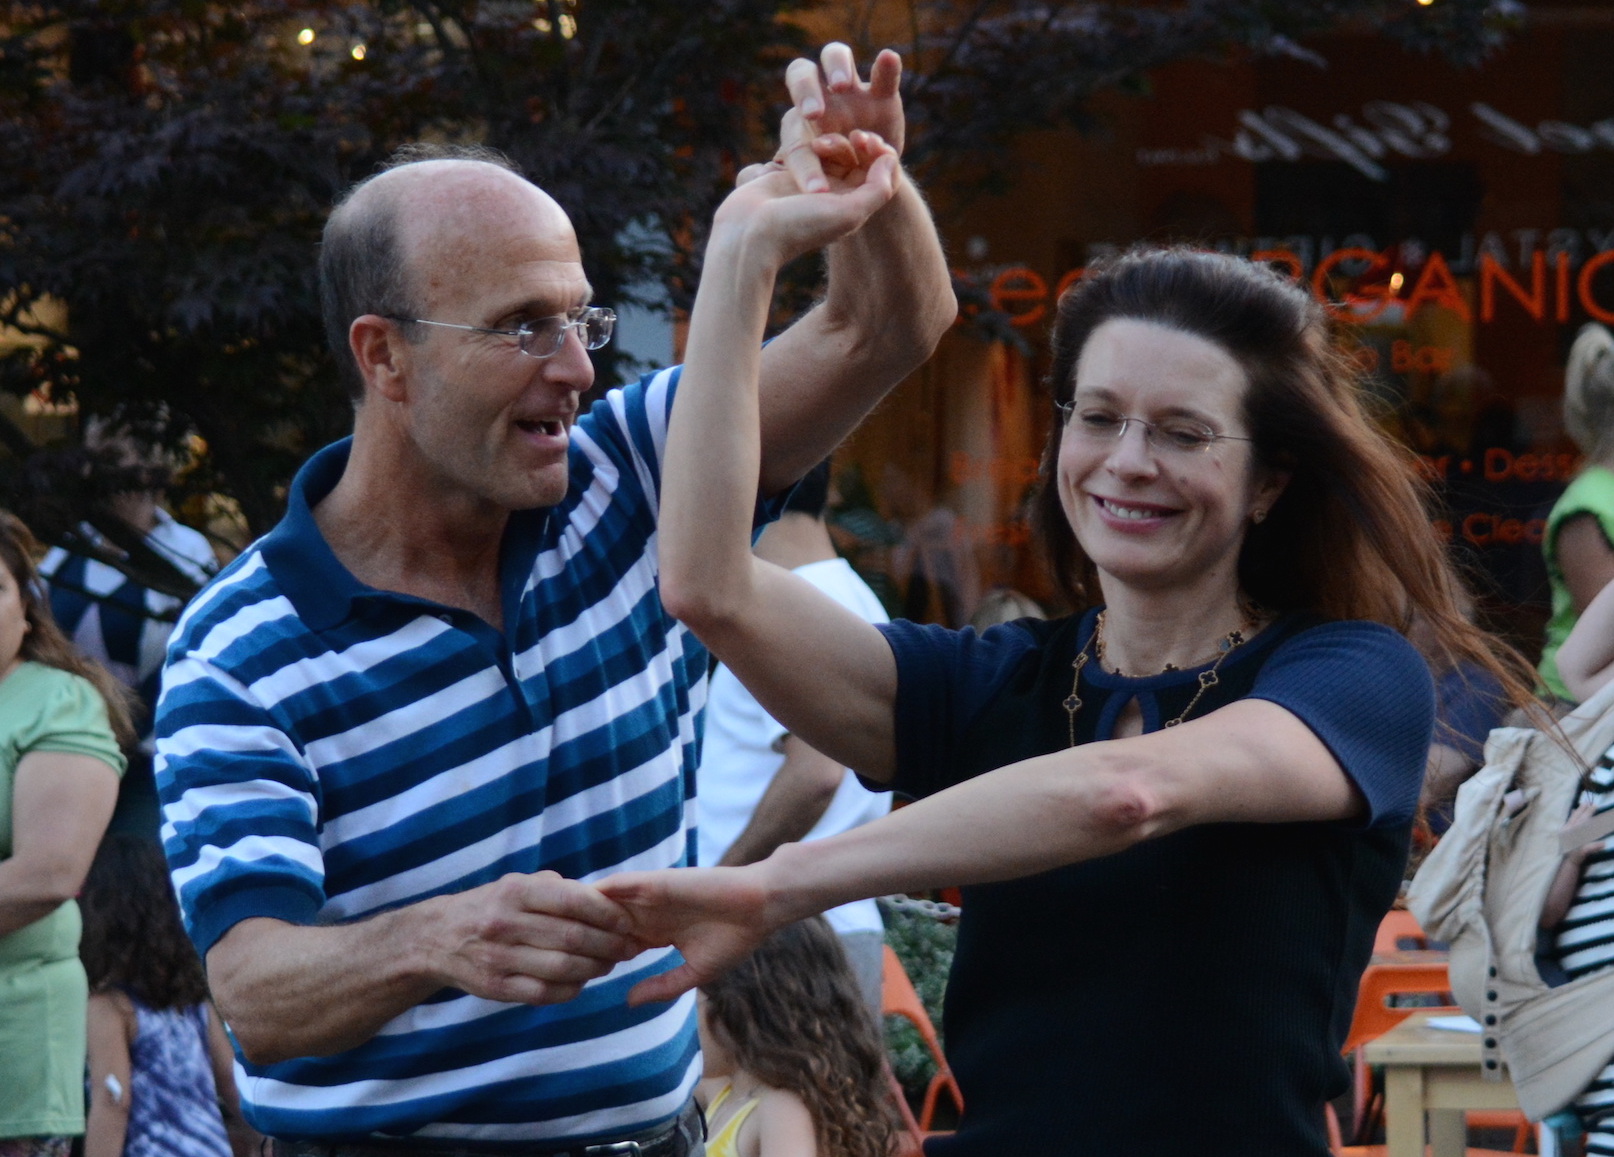 Promenade in Great Neck Plaza offers a taste of ballroom dancing and good food